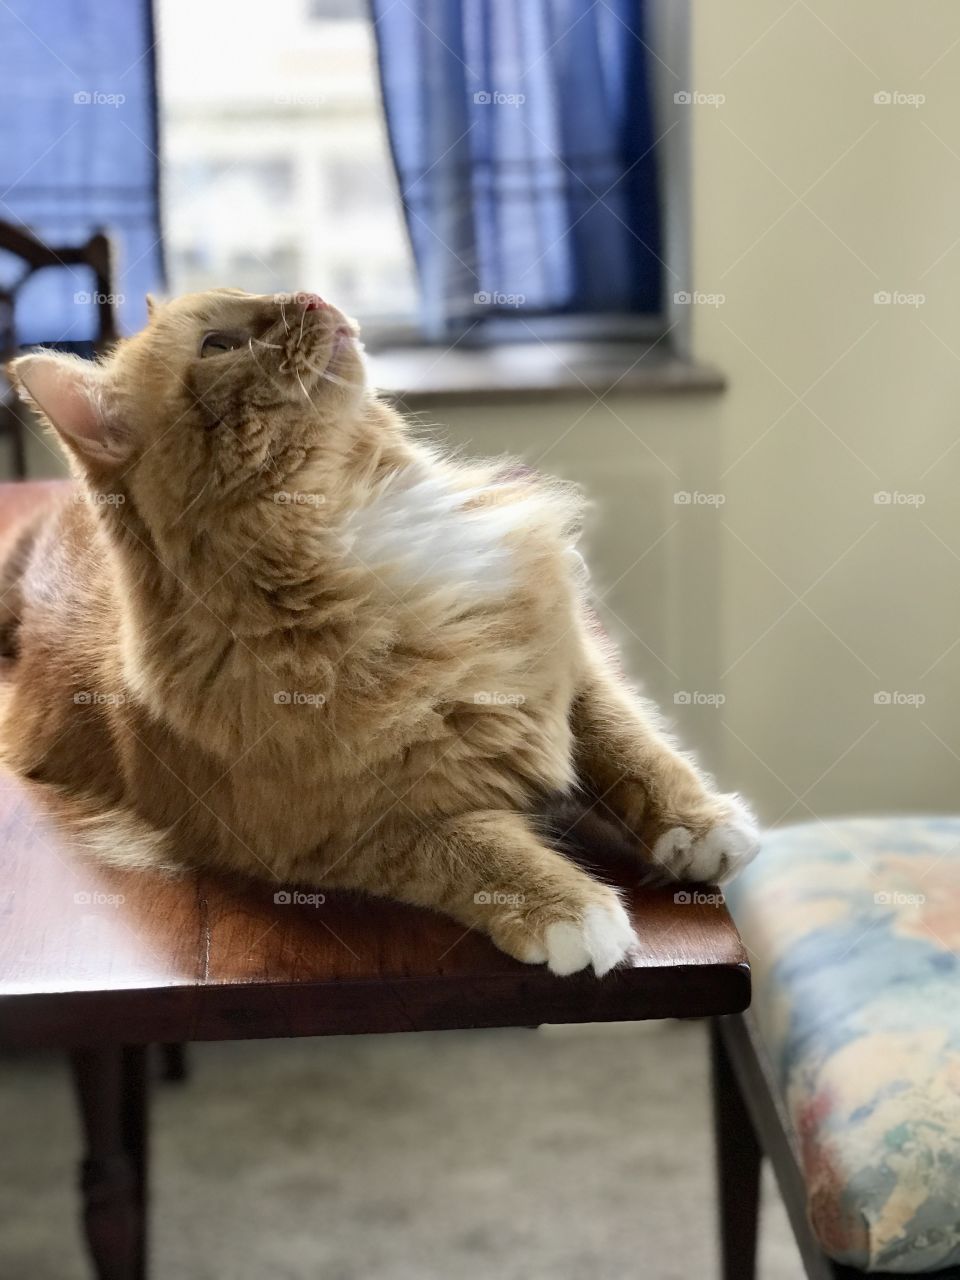 Cute Maine coon cat on a table looking up